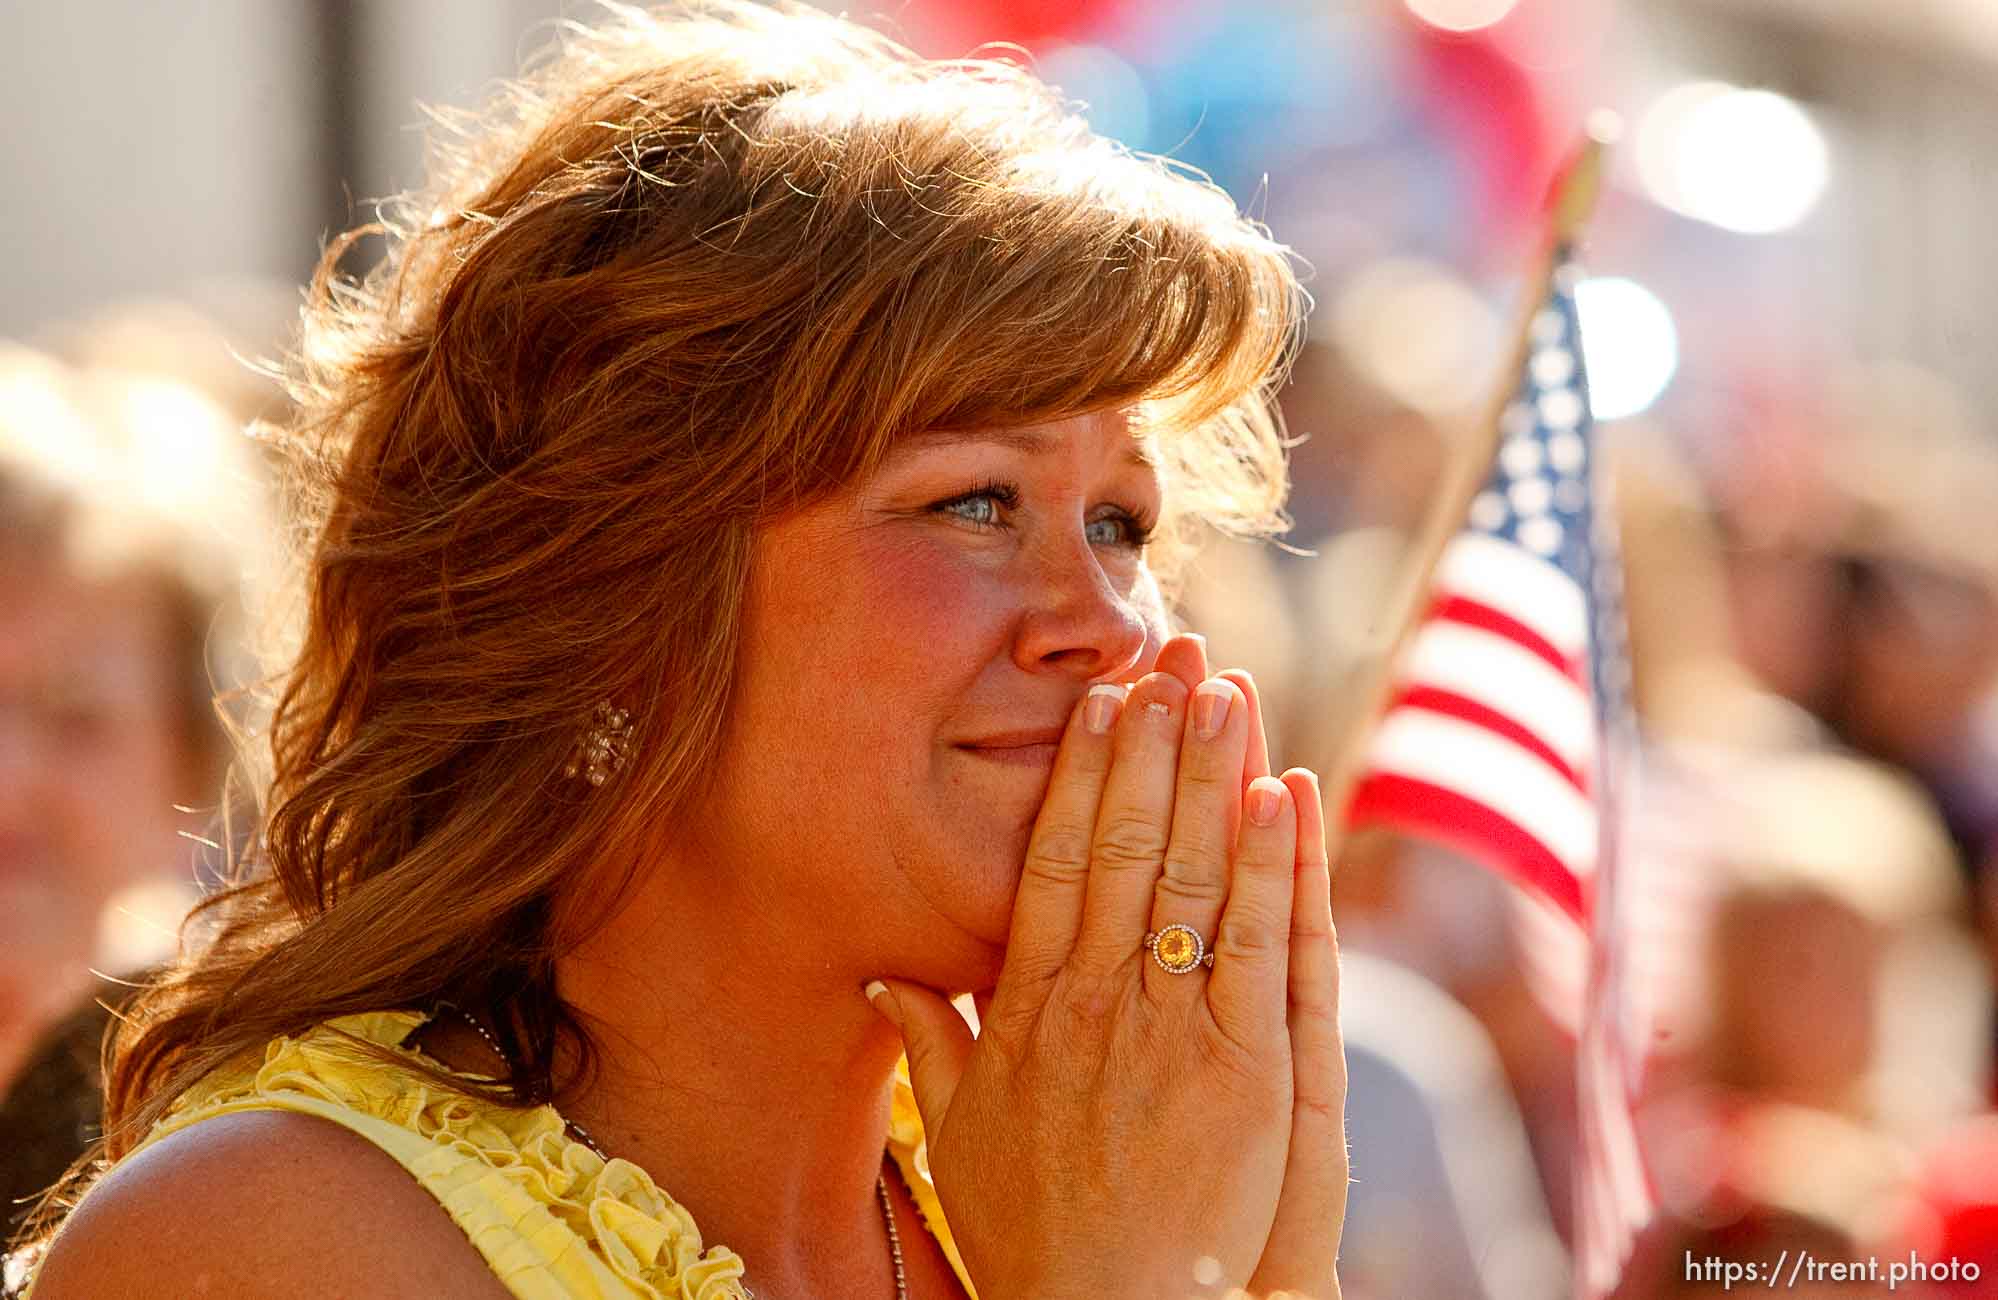 Trent Nelson  |  The Salt Lake Tribune
Amy Lyskowski awaits the return of her husband, Tech Sergeant Steve Lyskowski, as the 729th Air Control Squadron returned to Hill Air Force Base in Layton, Utah, after six months in Afghanistan Wednesday, July 20, 2011.